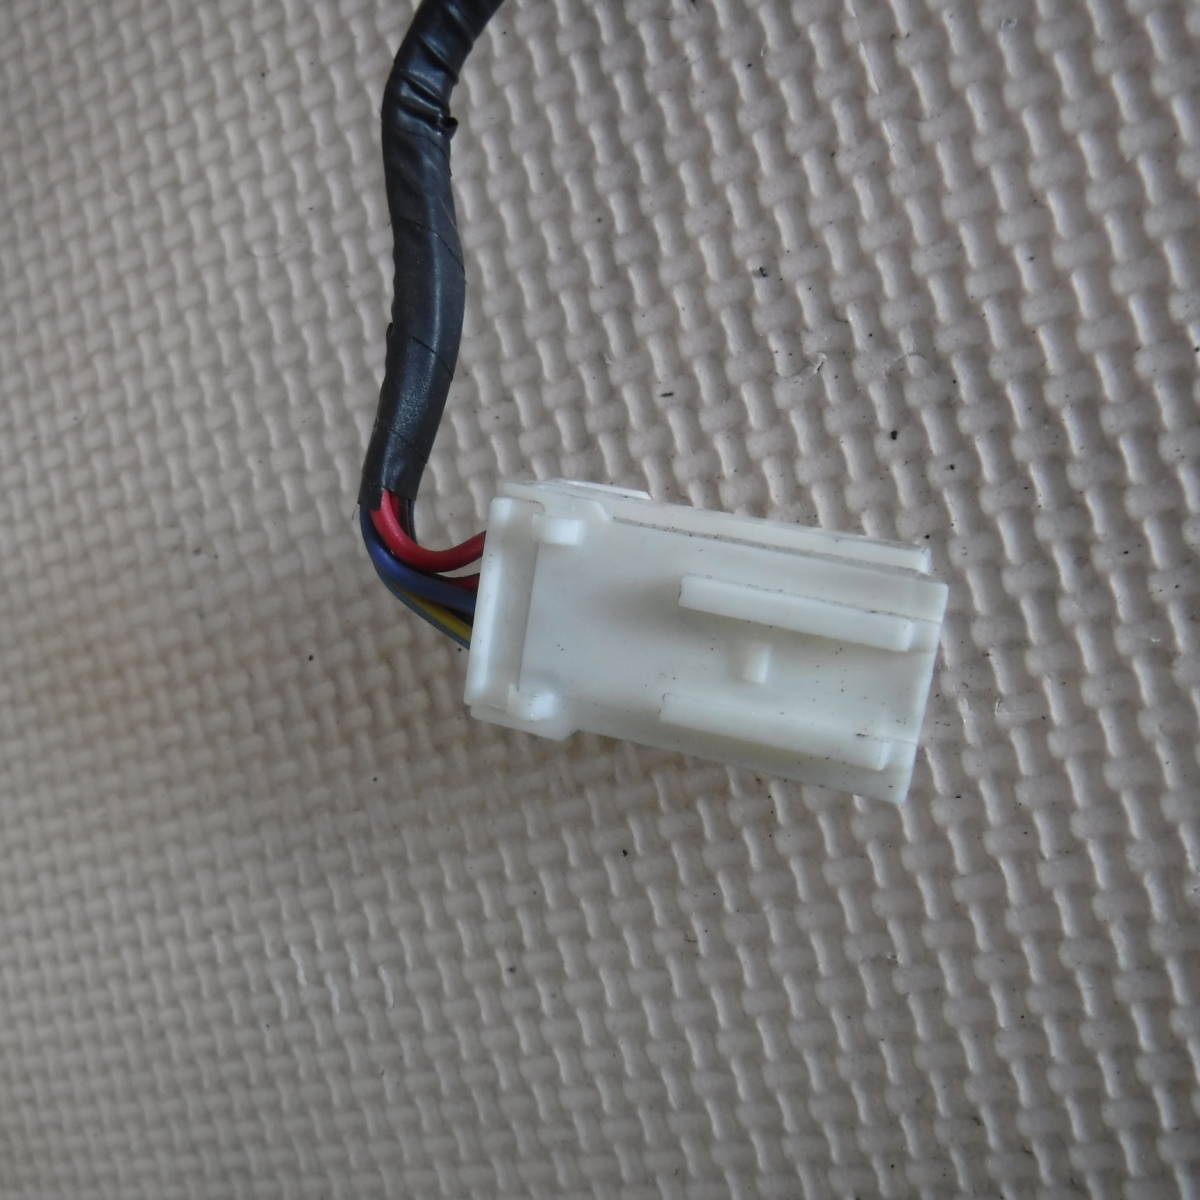  Mitsubishi Chariot N43W air conditioner temperature sensor N34W thermistor N48W inside . temperature sensor N33W original Mitsubishi part removing car equipped 